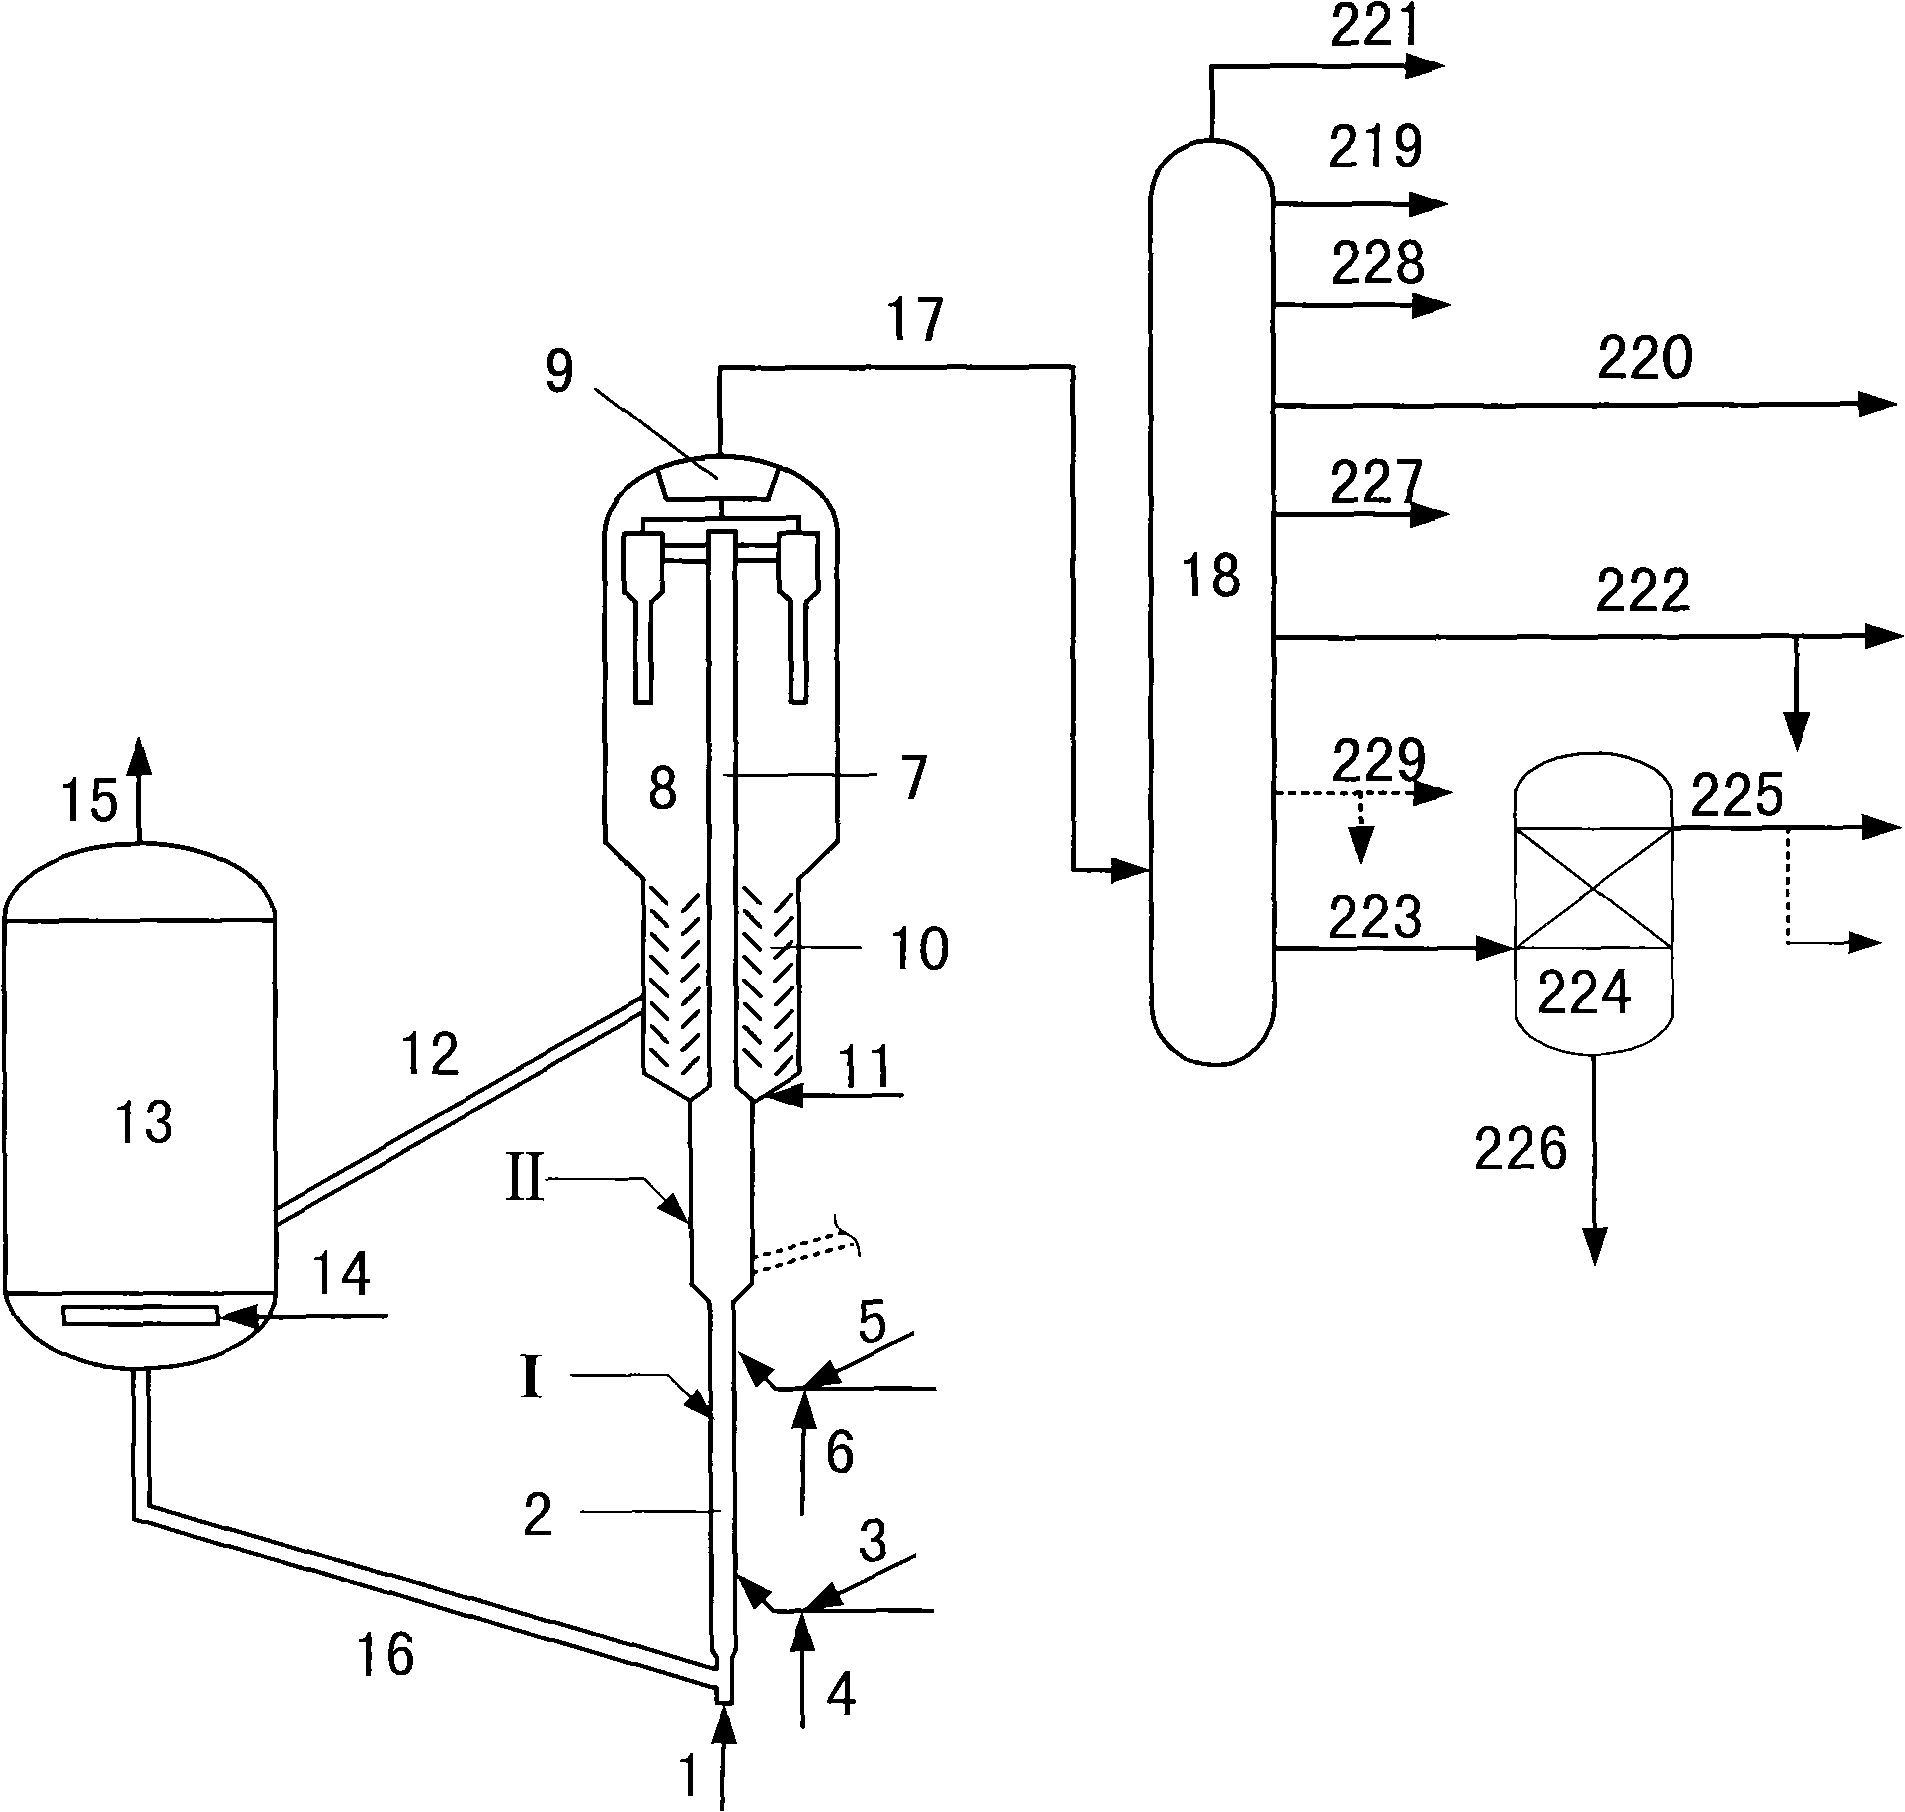 Catalytic conversion method for producing high-octane petrol from crude oil